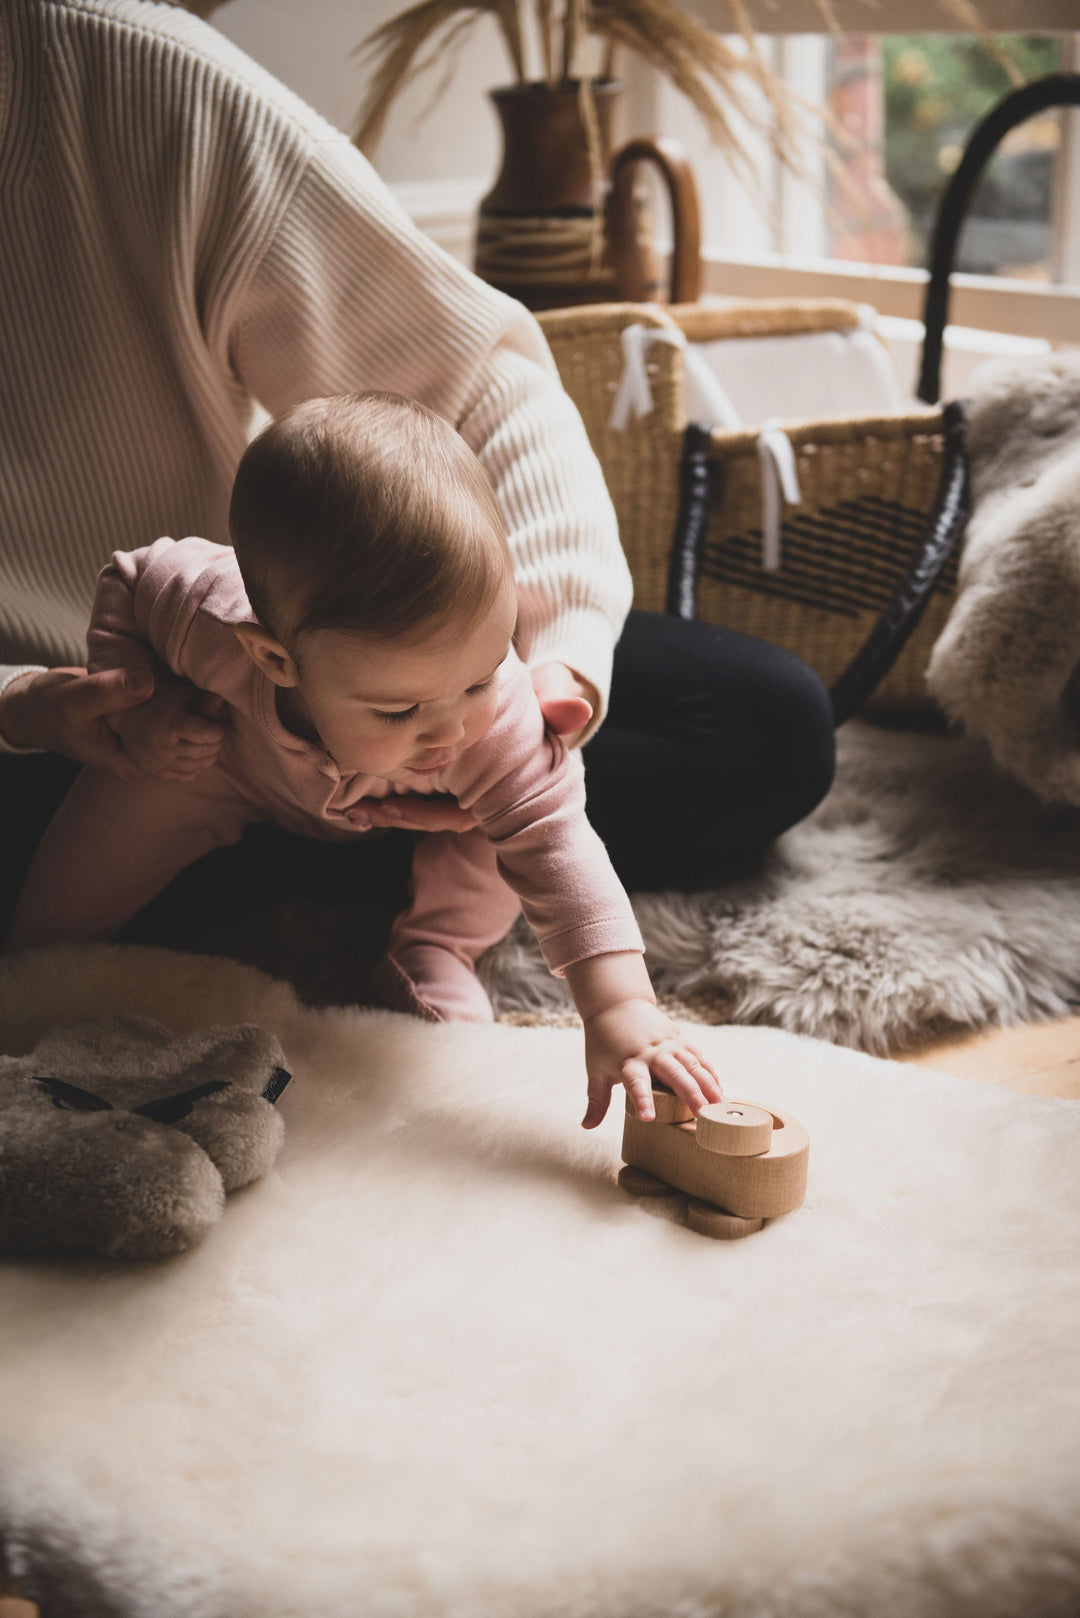 Why use Sheepskin for Your Baby?